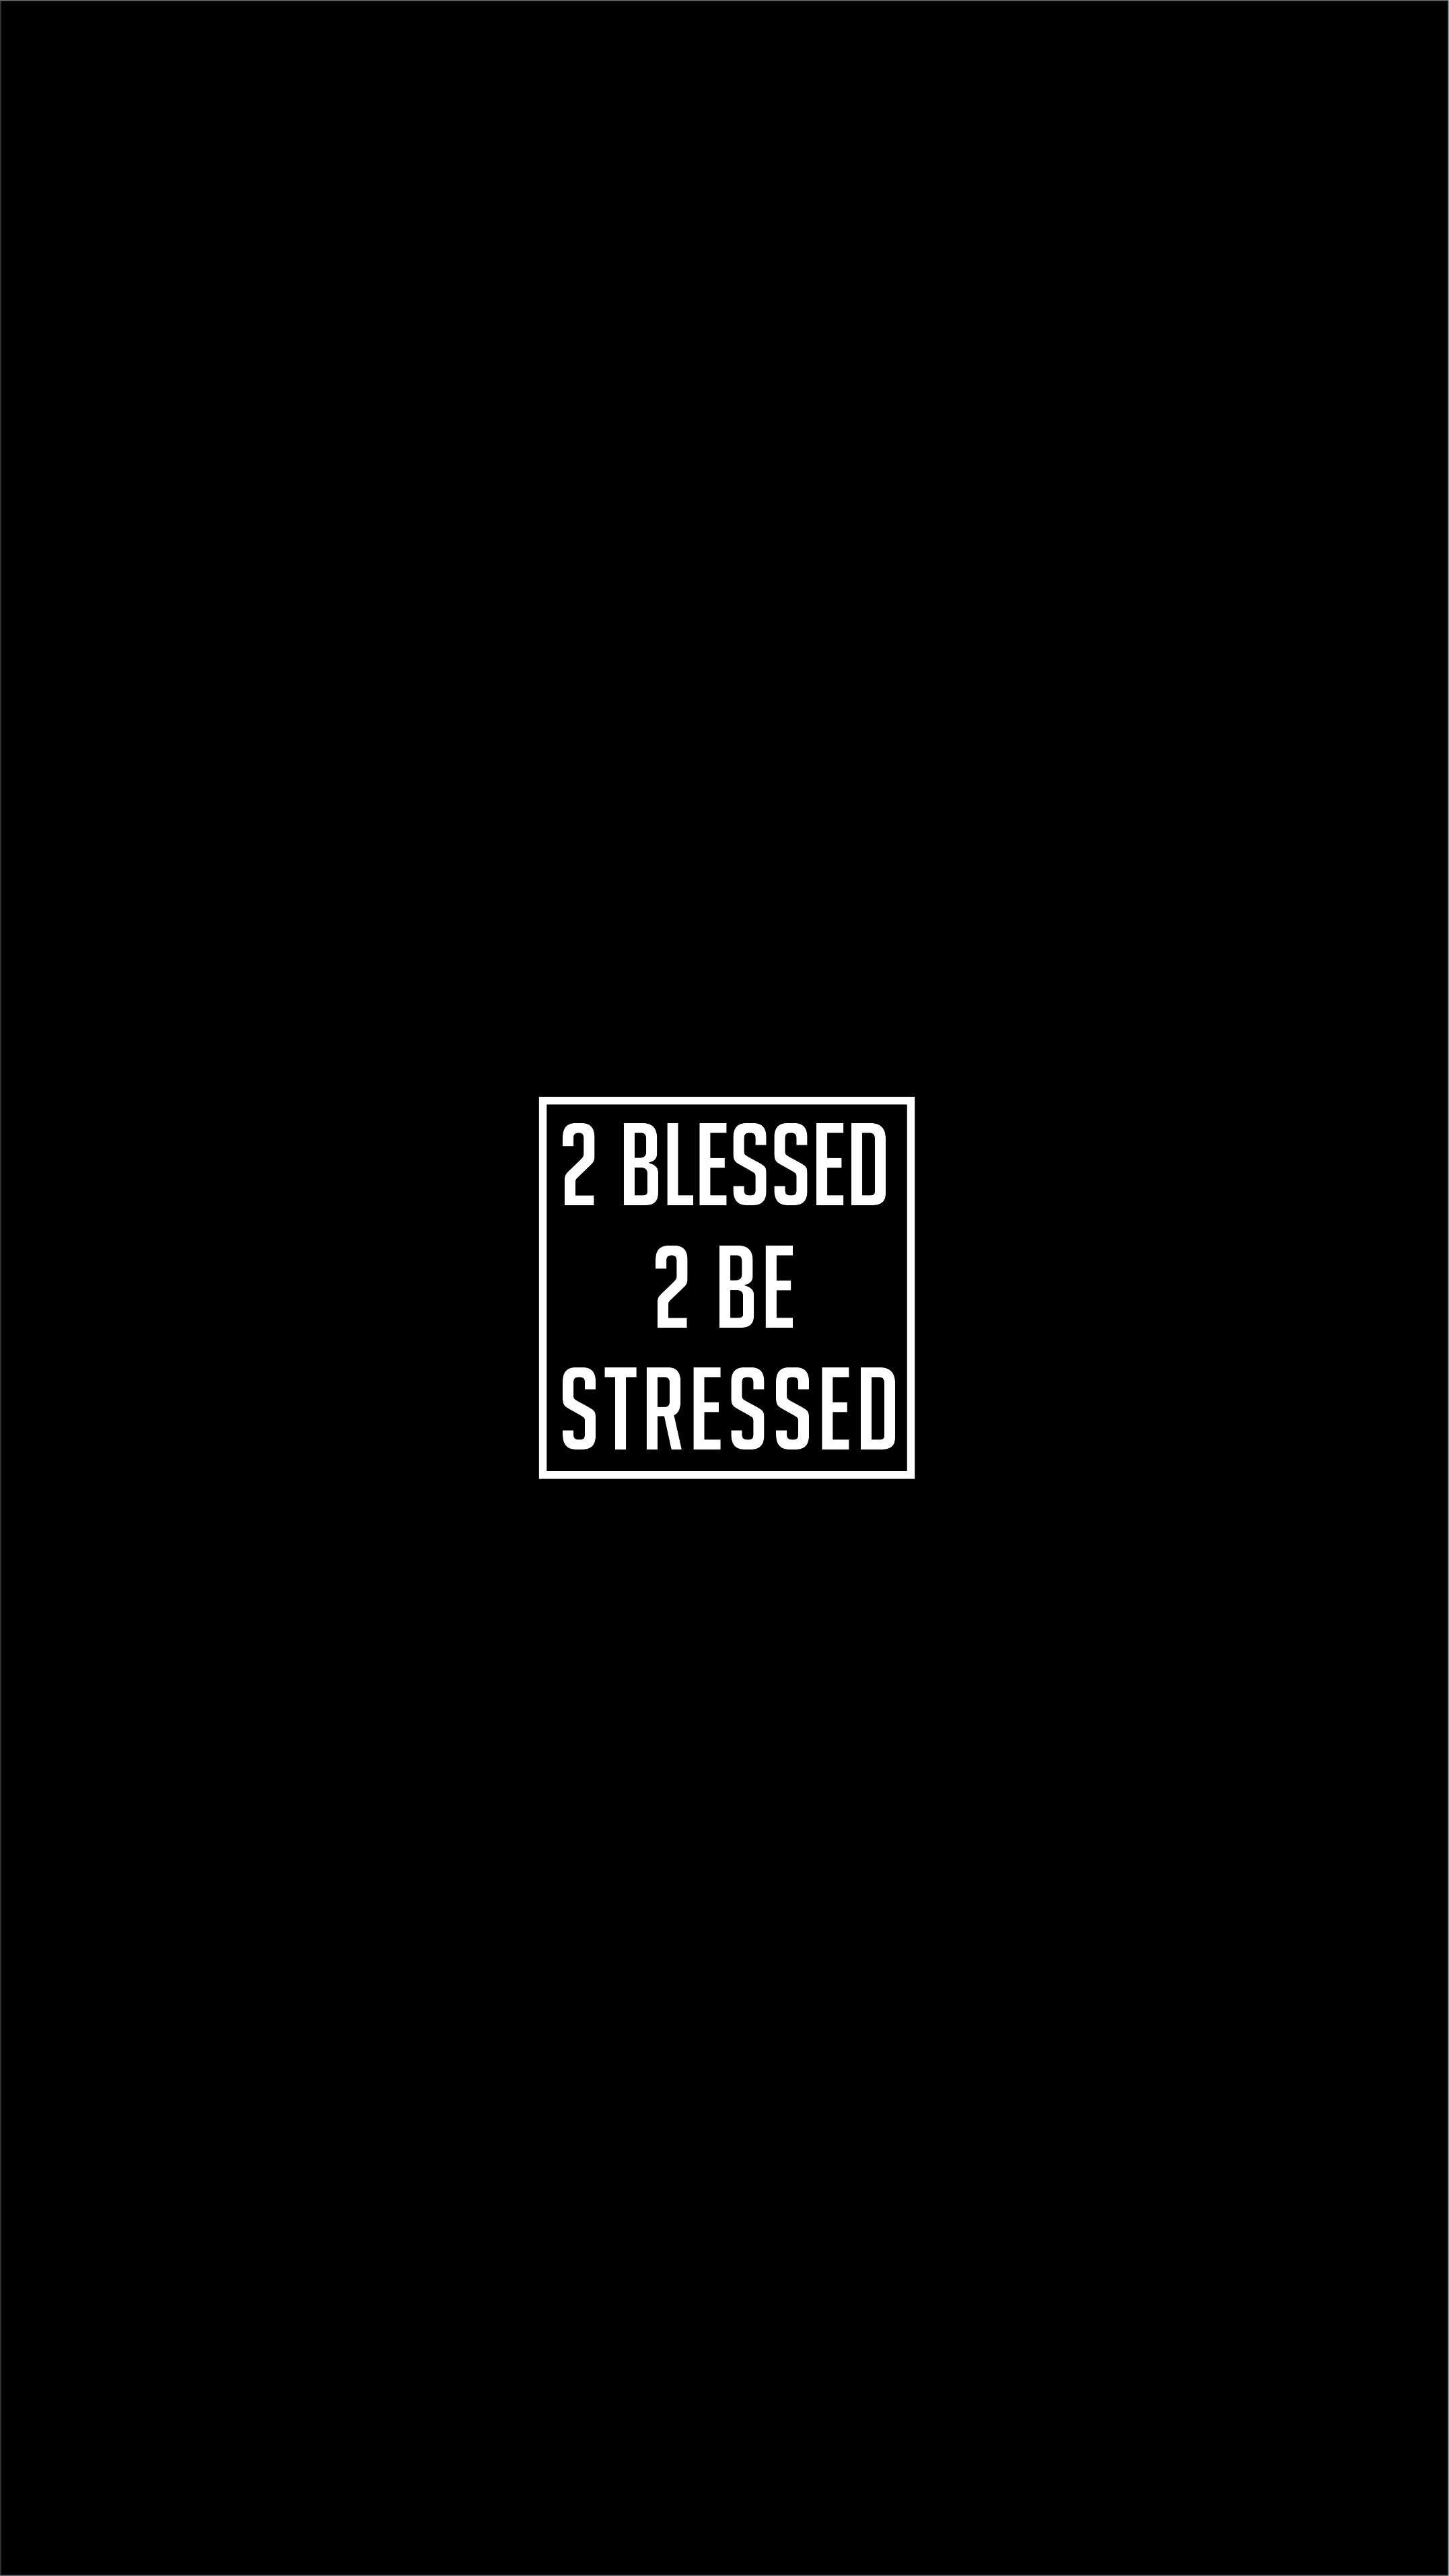 Too blessed to be stressed. Blessed wallpaper, Stress, Blessed